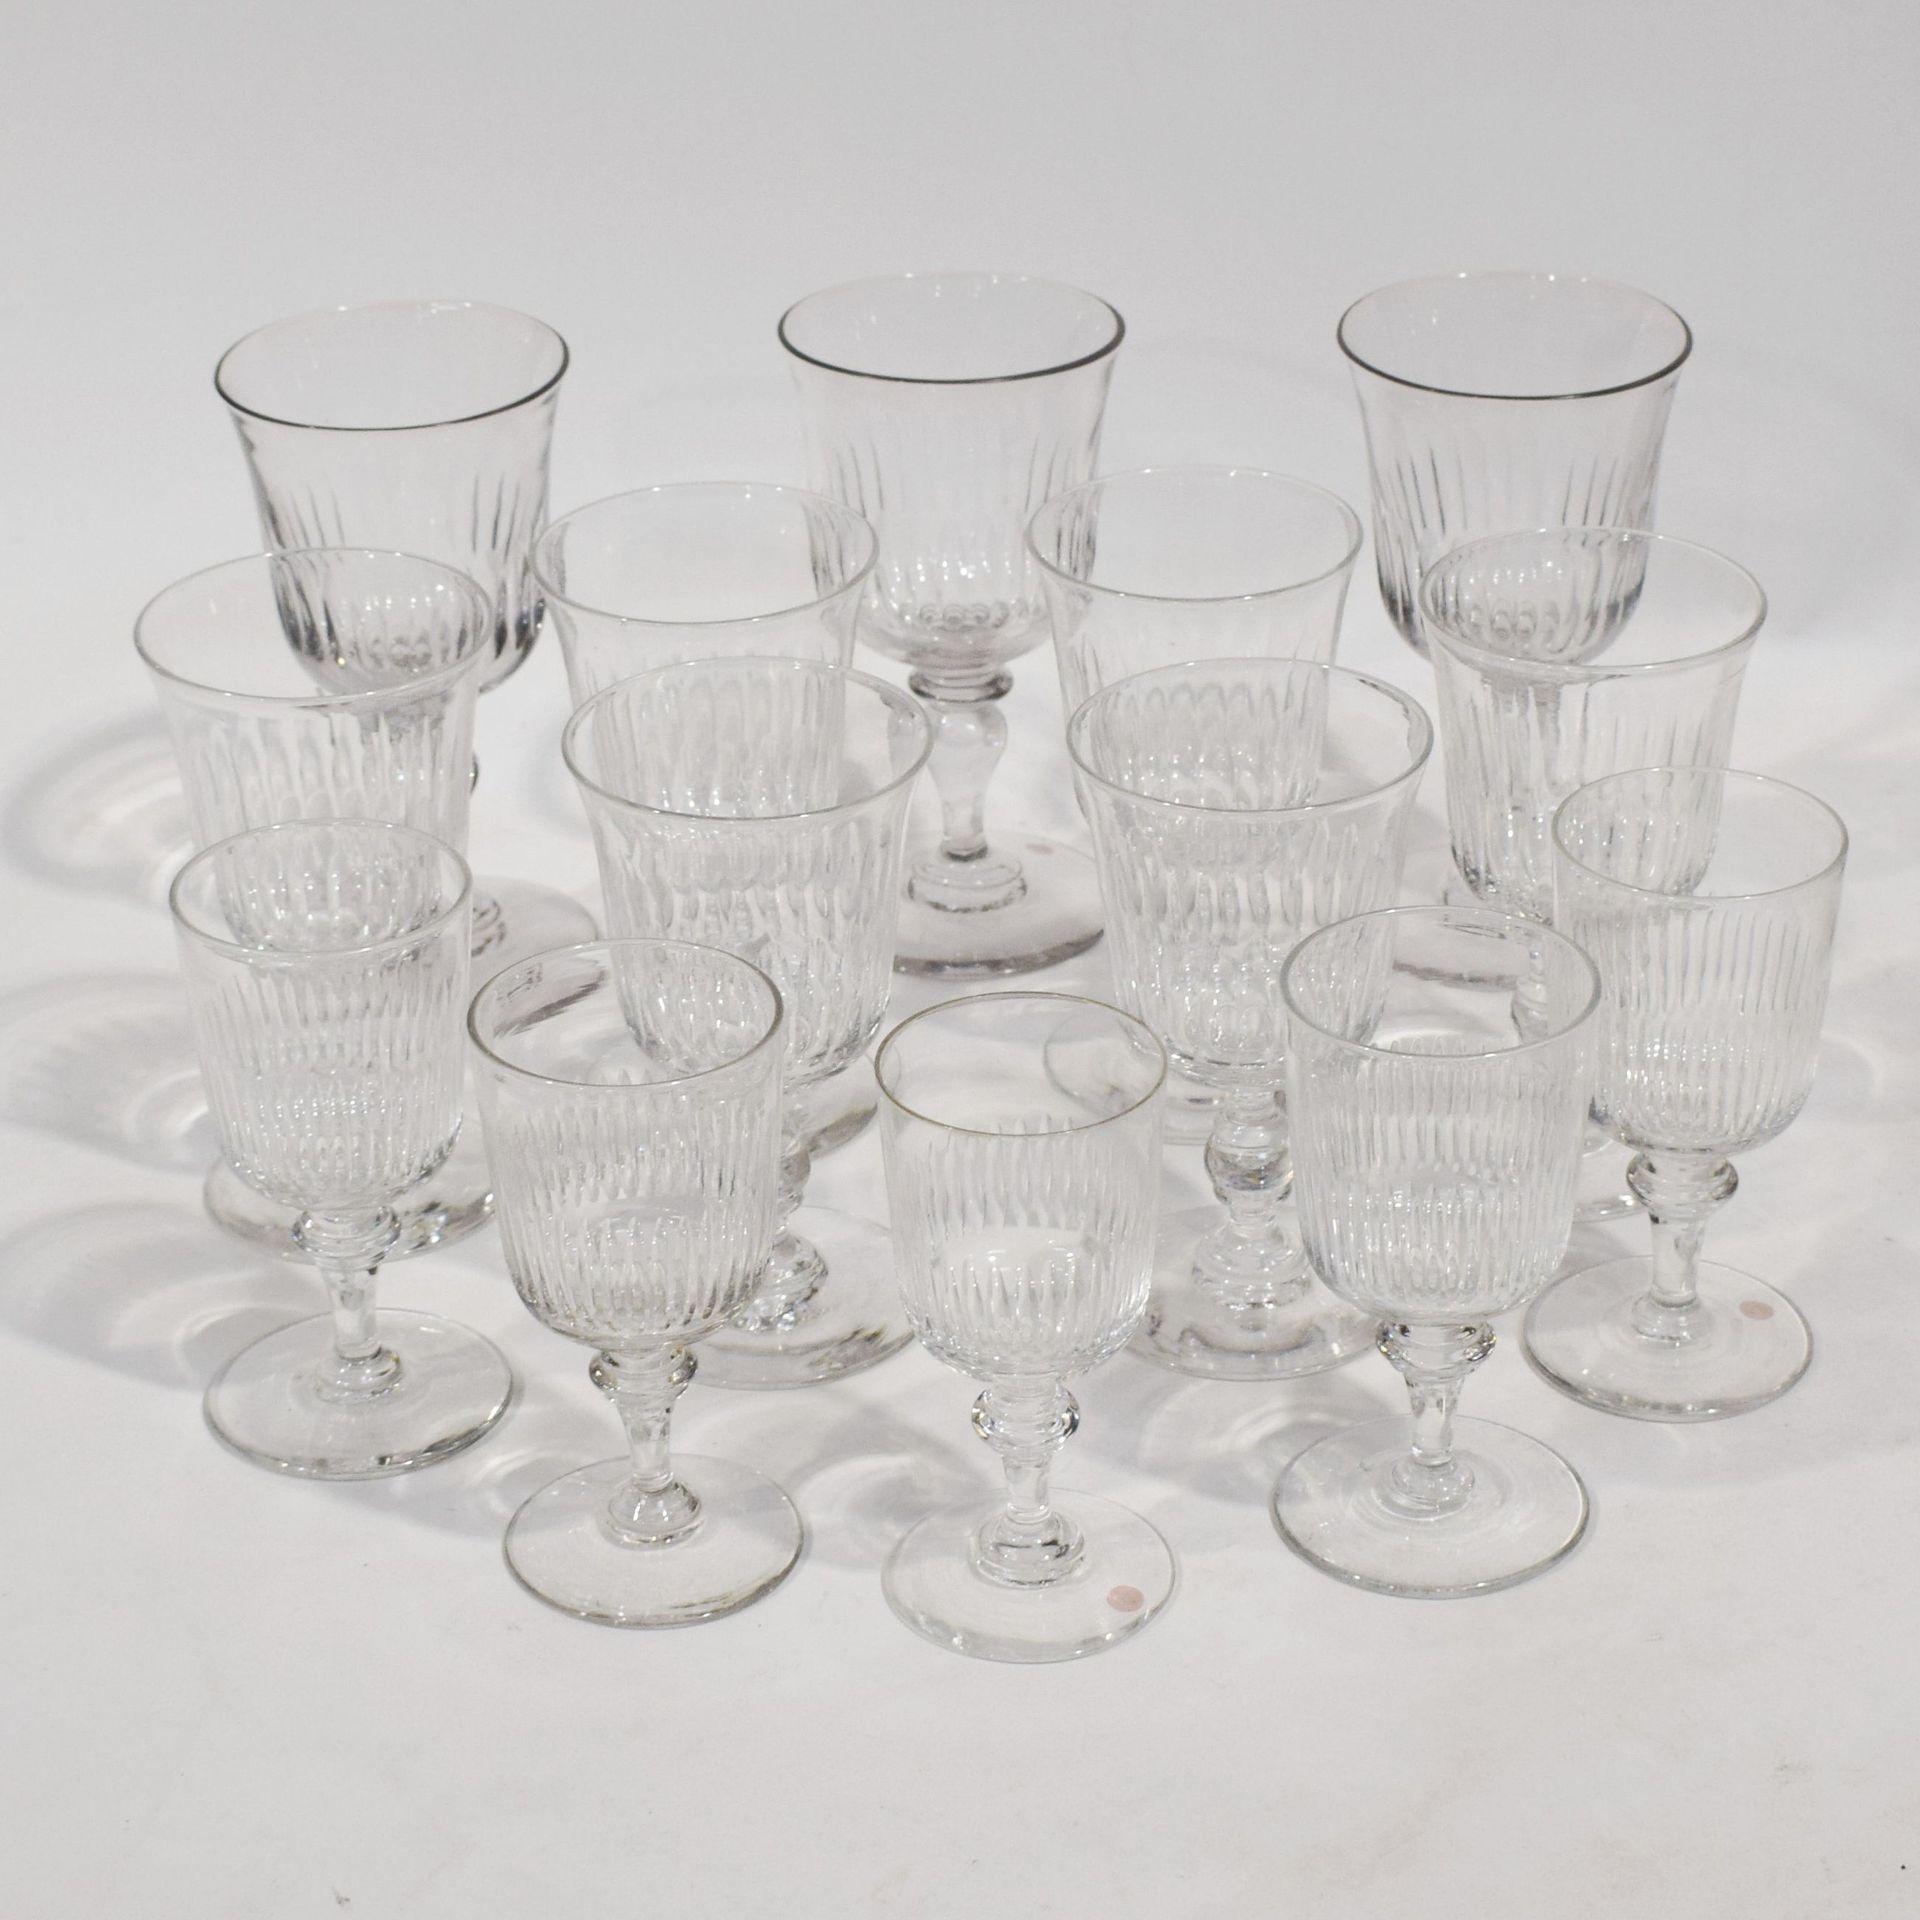 Null Set of 14 antique crystal glasses, late 19th/early 20th century, mouth blow&hellip;